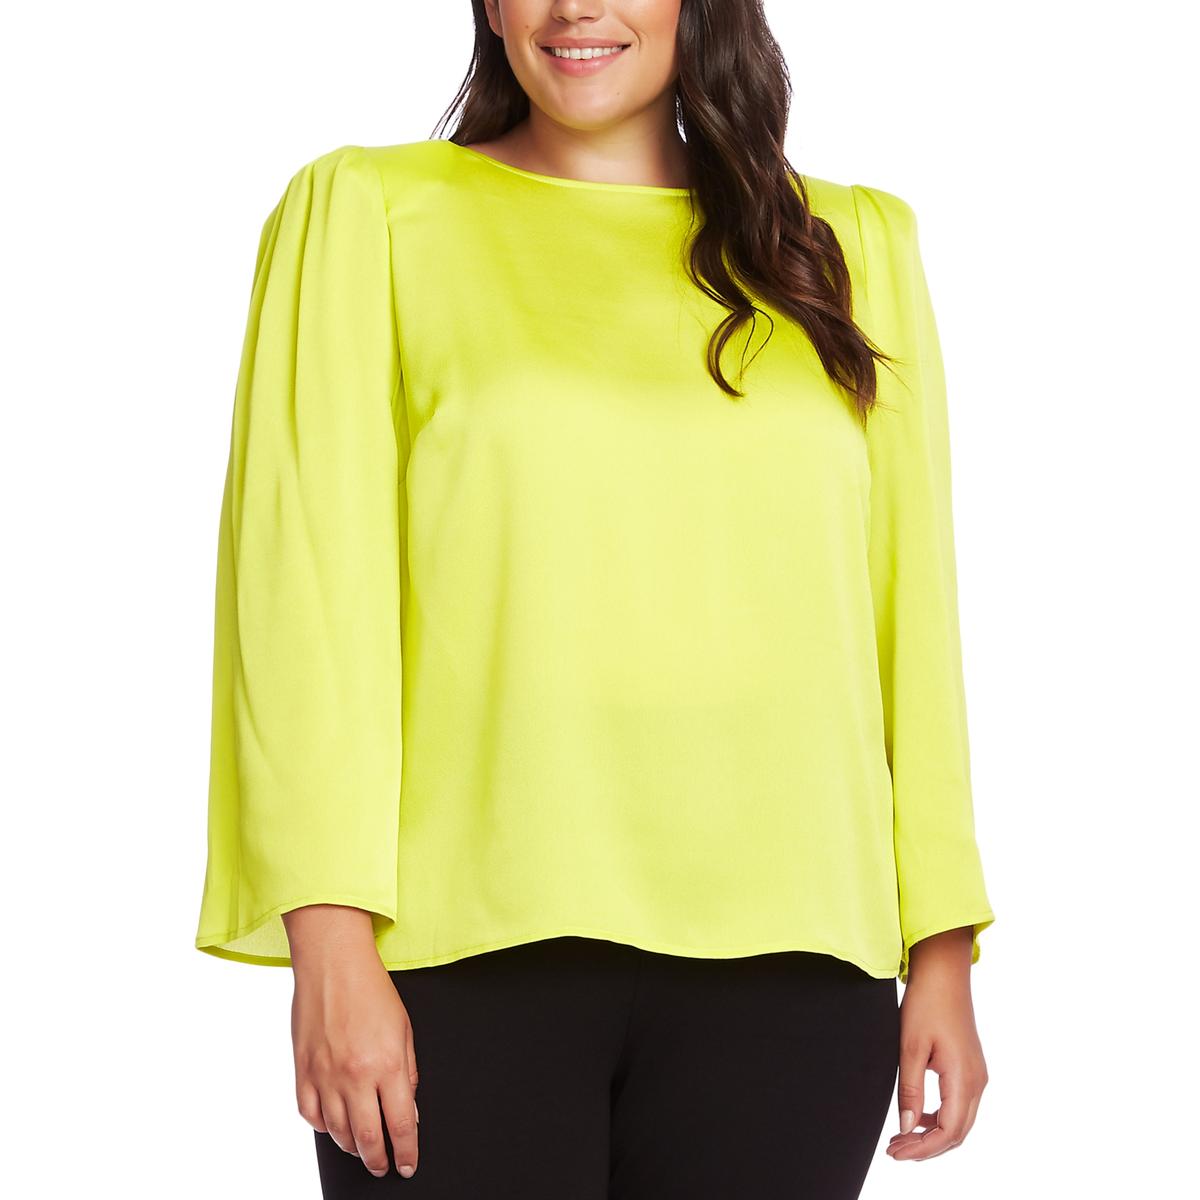 Vince Camuto Womens Green Satin Dressy Bright Blouse Top Plus 2X BHFO ...